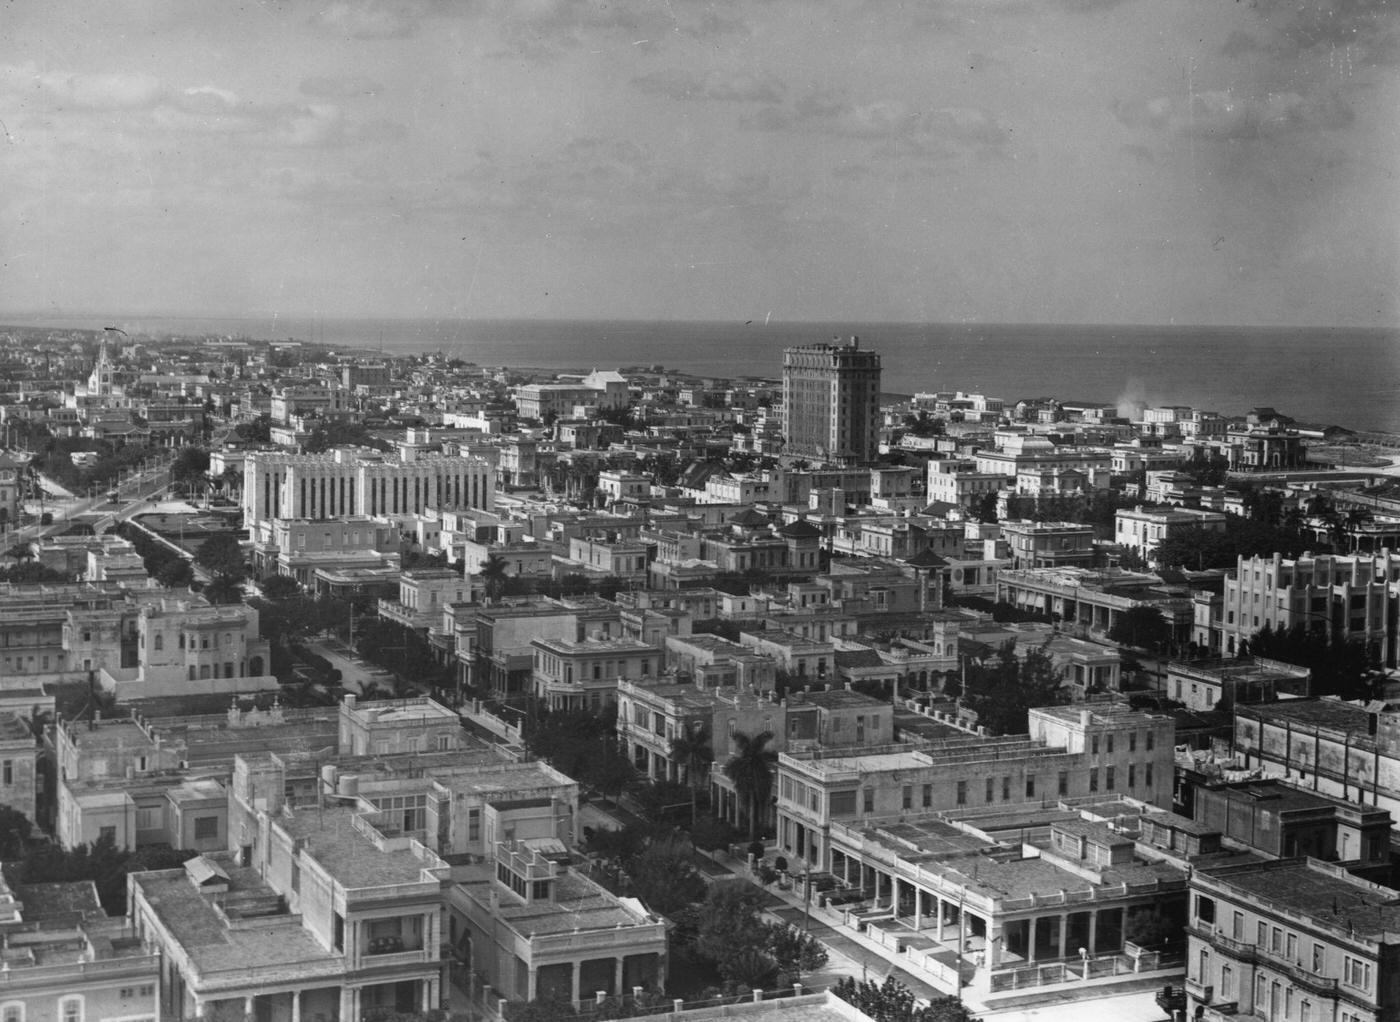 Havana, capital city and chief seaport of Cuba with its flat-roofed houses, 1930